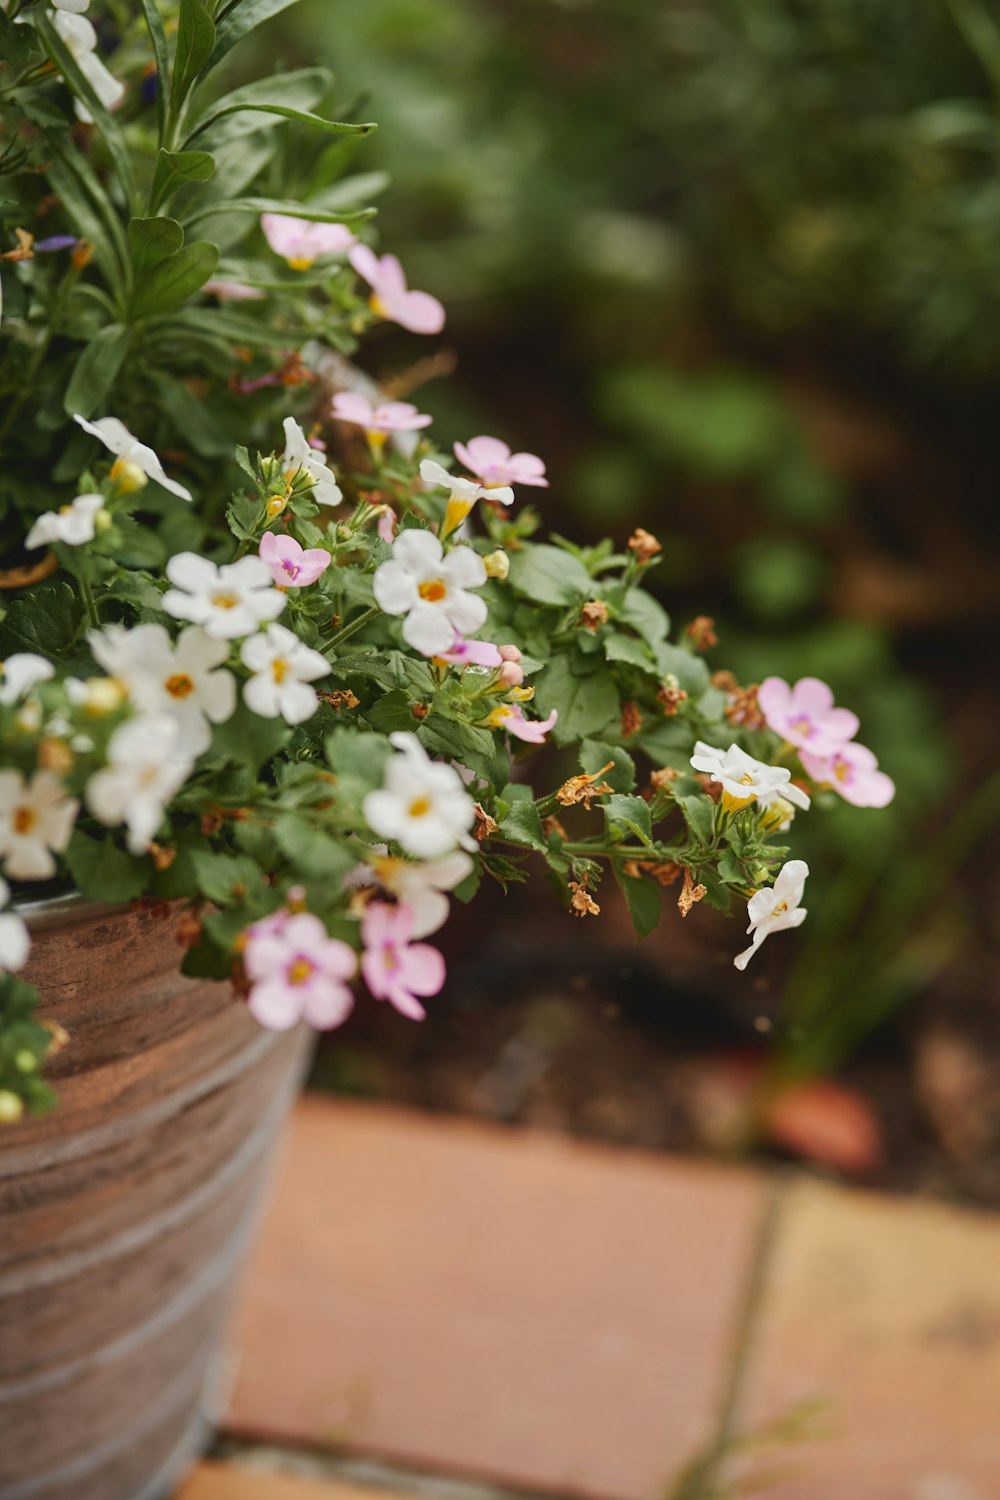 a potted plant with white and pink flowers